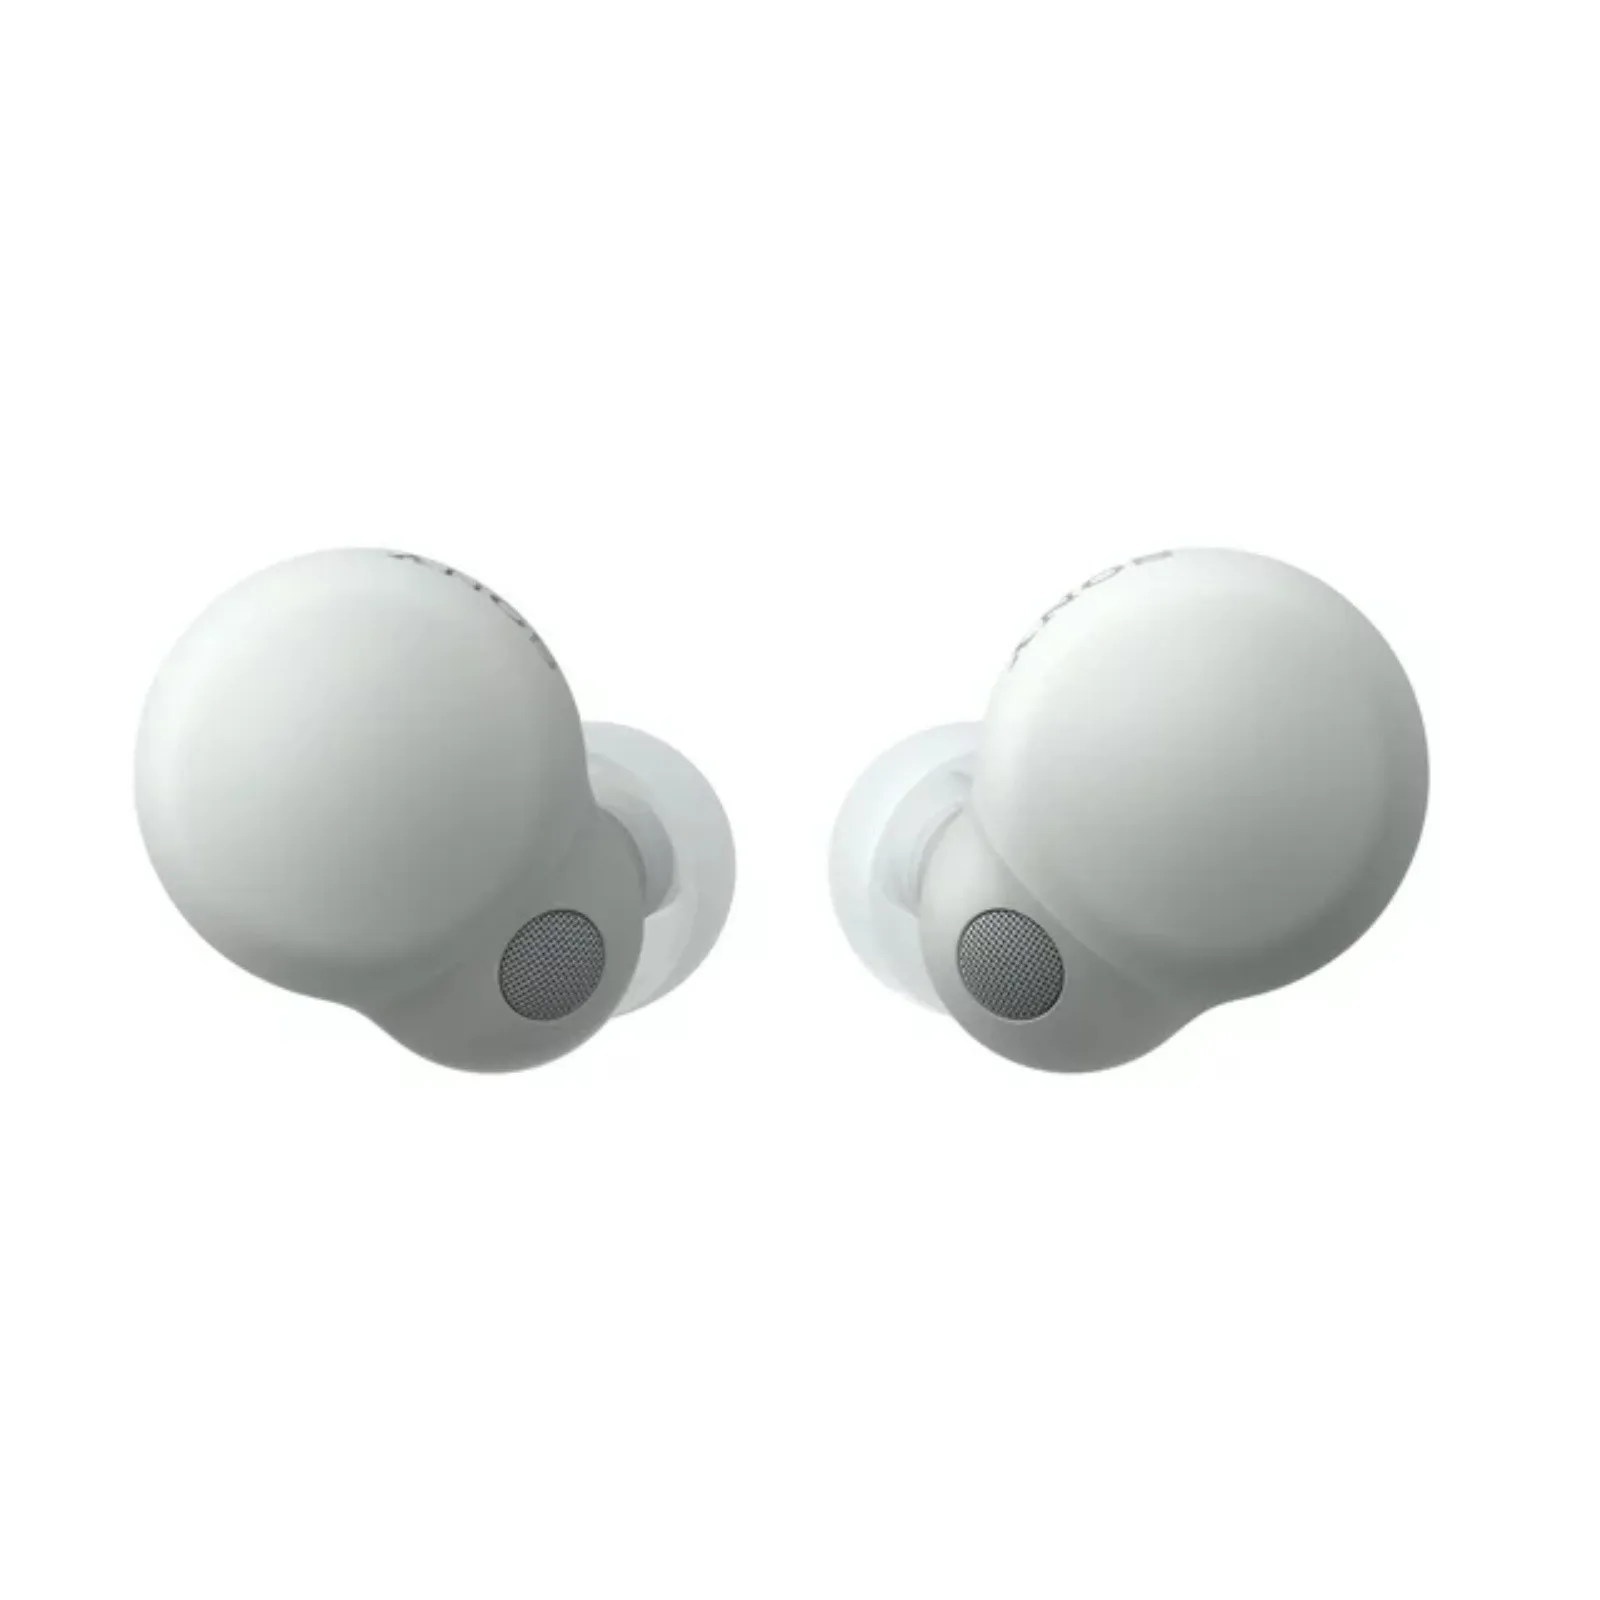 WFLS900N/B5 LinkBuds S Truly Wireless Noise Canceling Earbuds